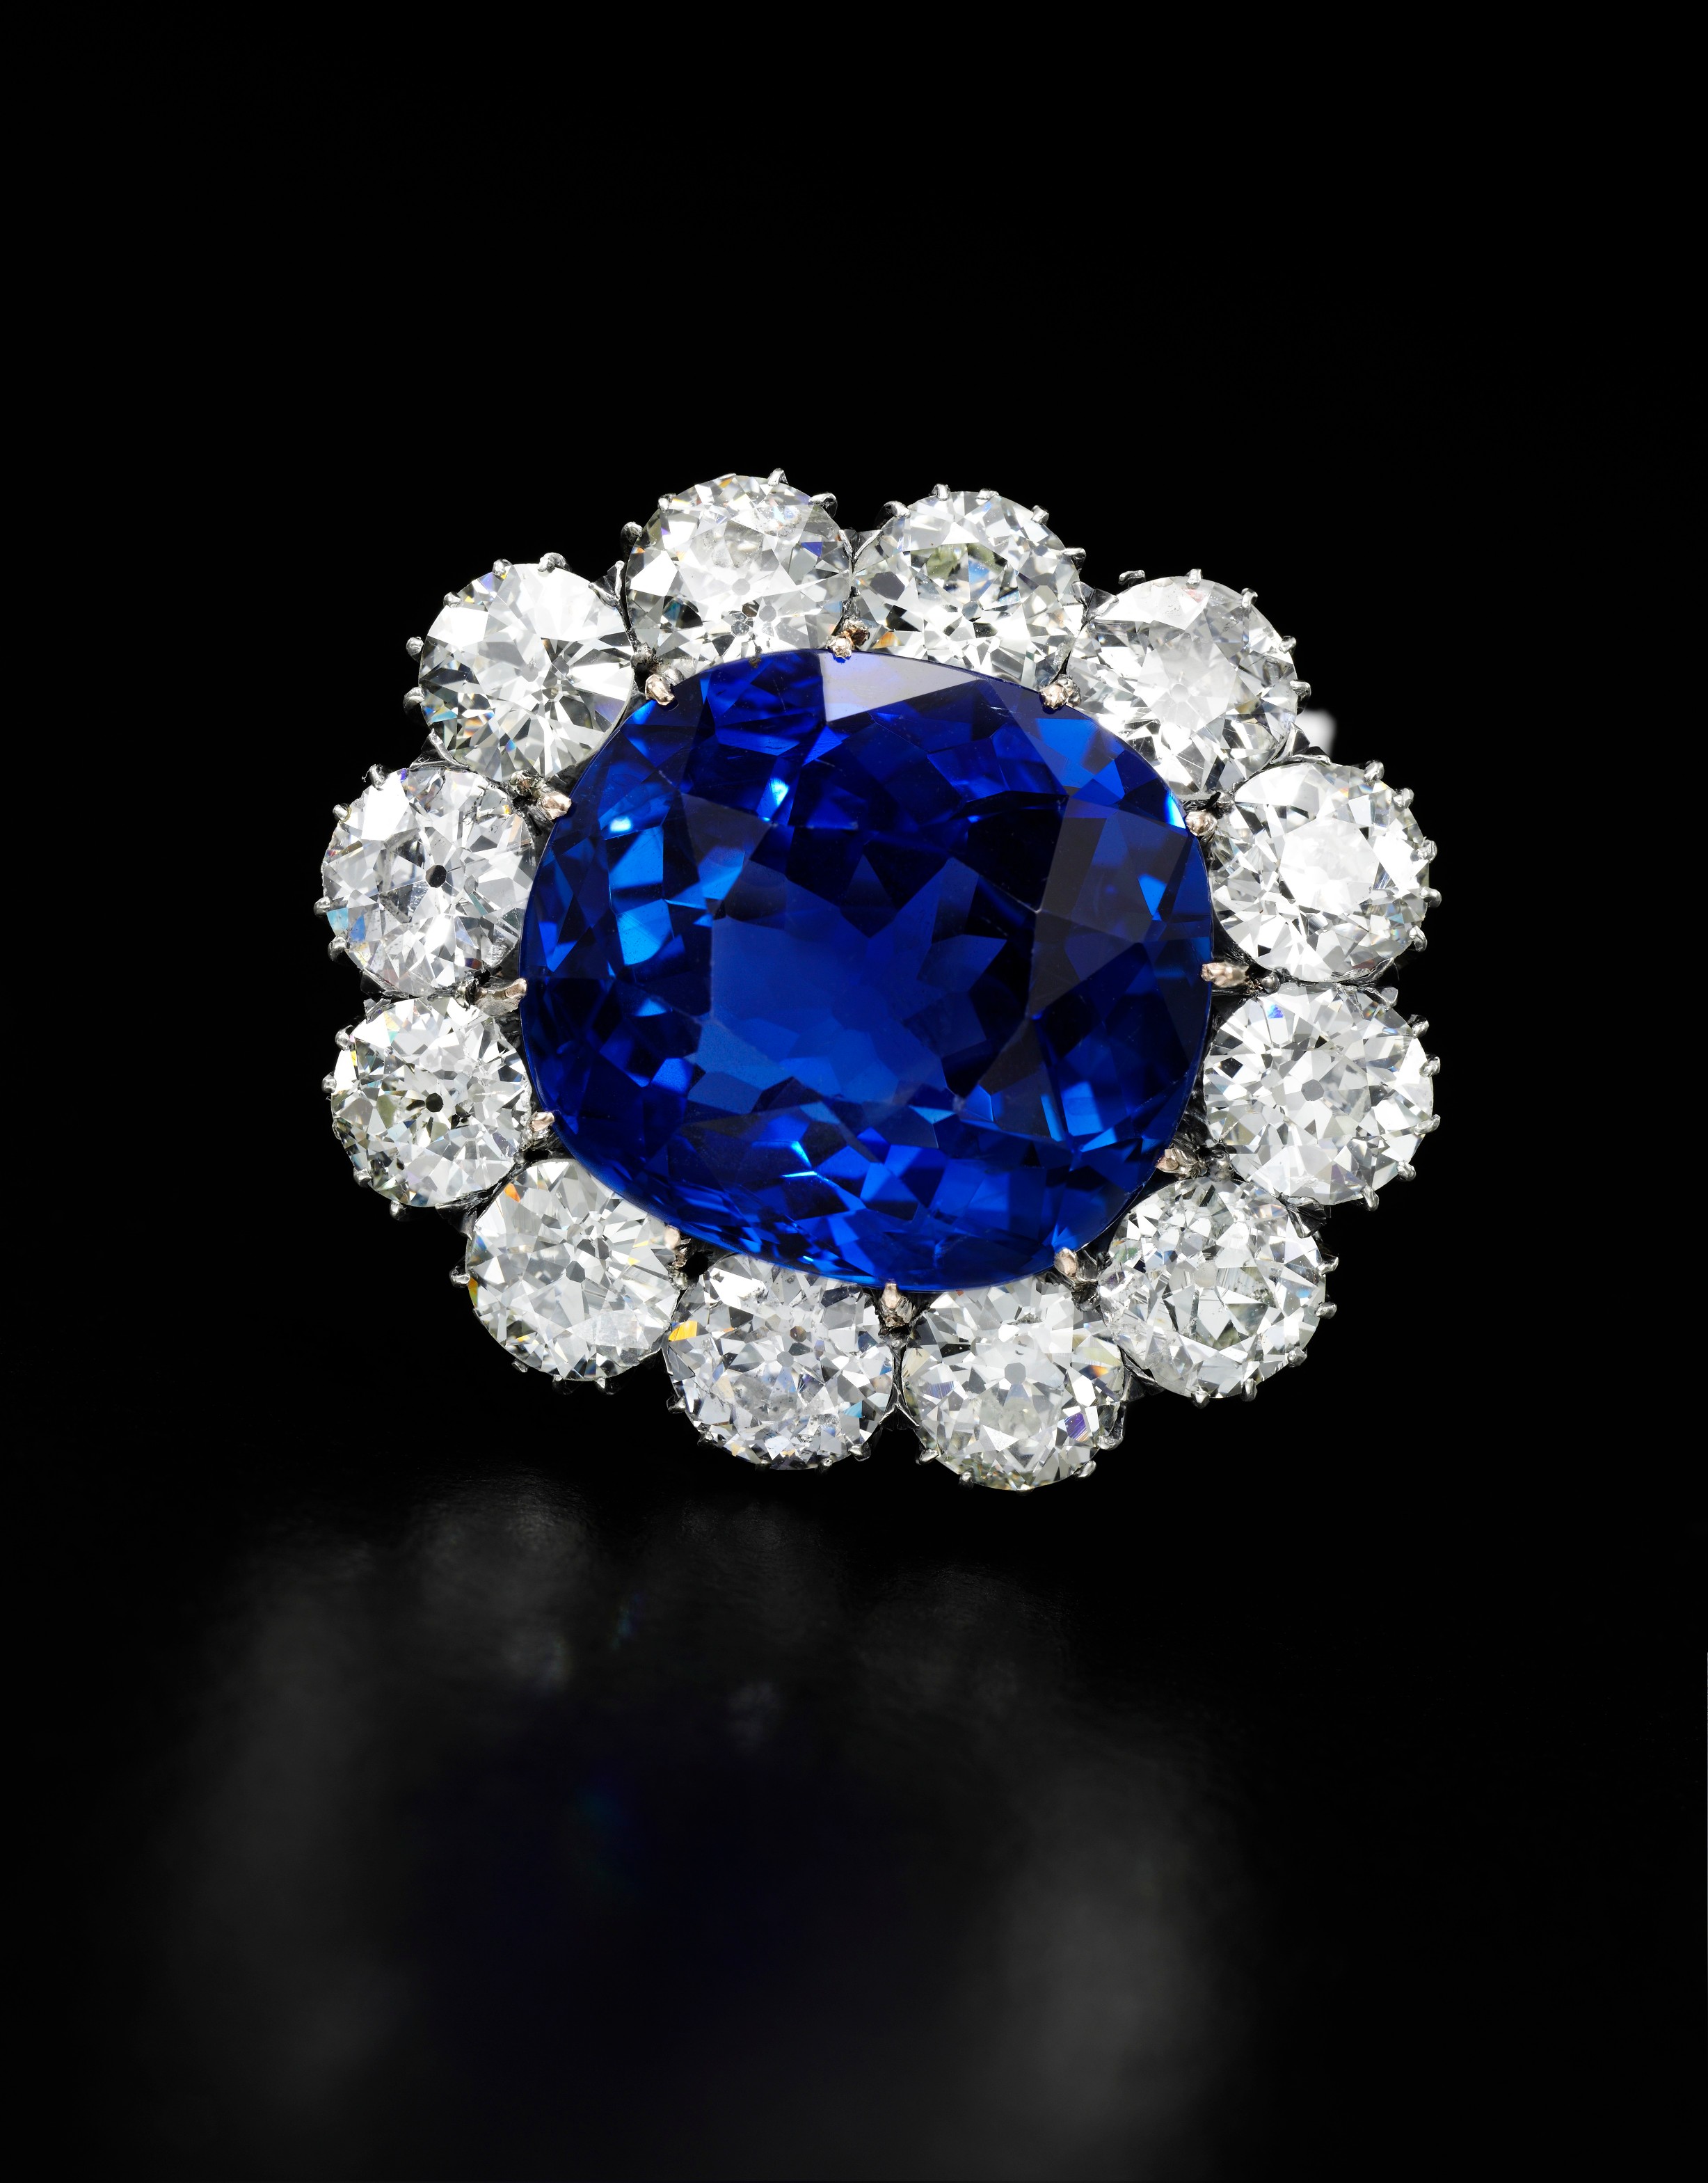 Impressive sapphire and diamond brooch -  on black -Royal Jewels from the Bourbon Parma Family - Sotheby's 14 November 2018.jpg